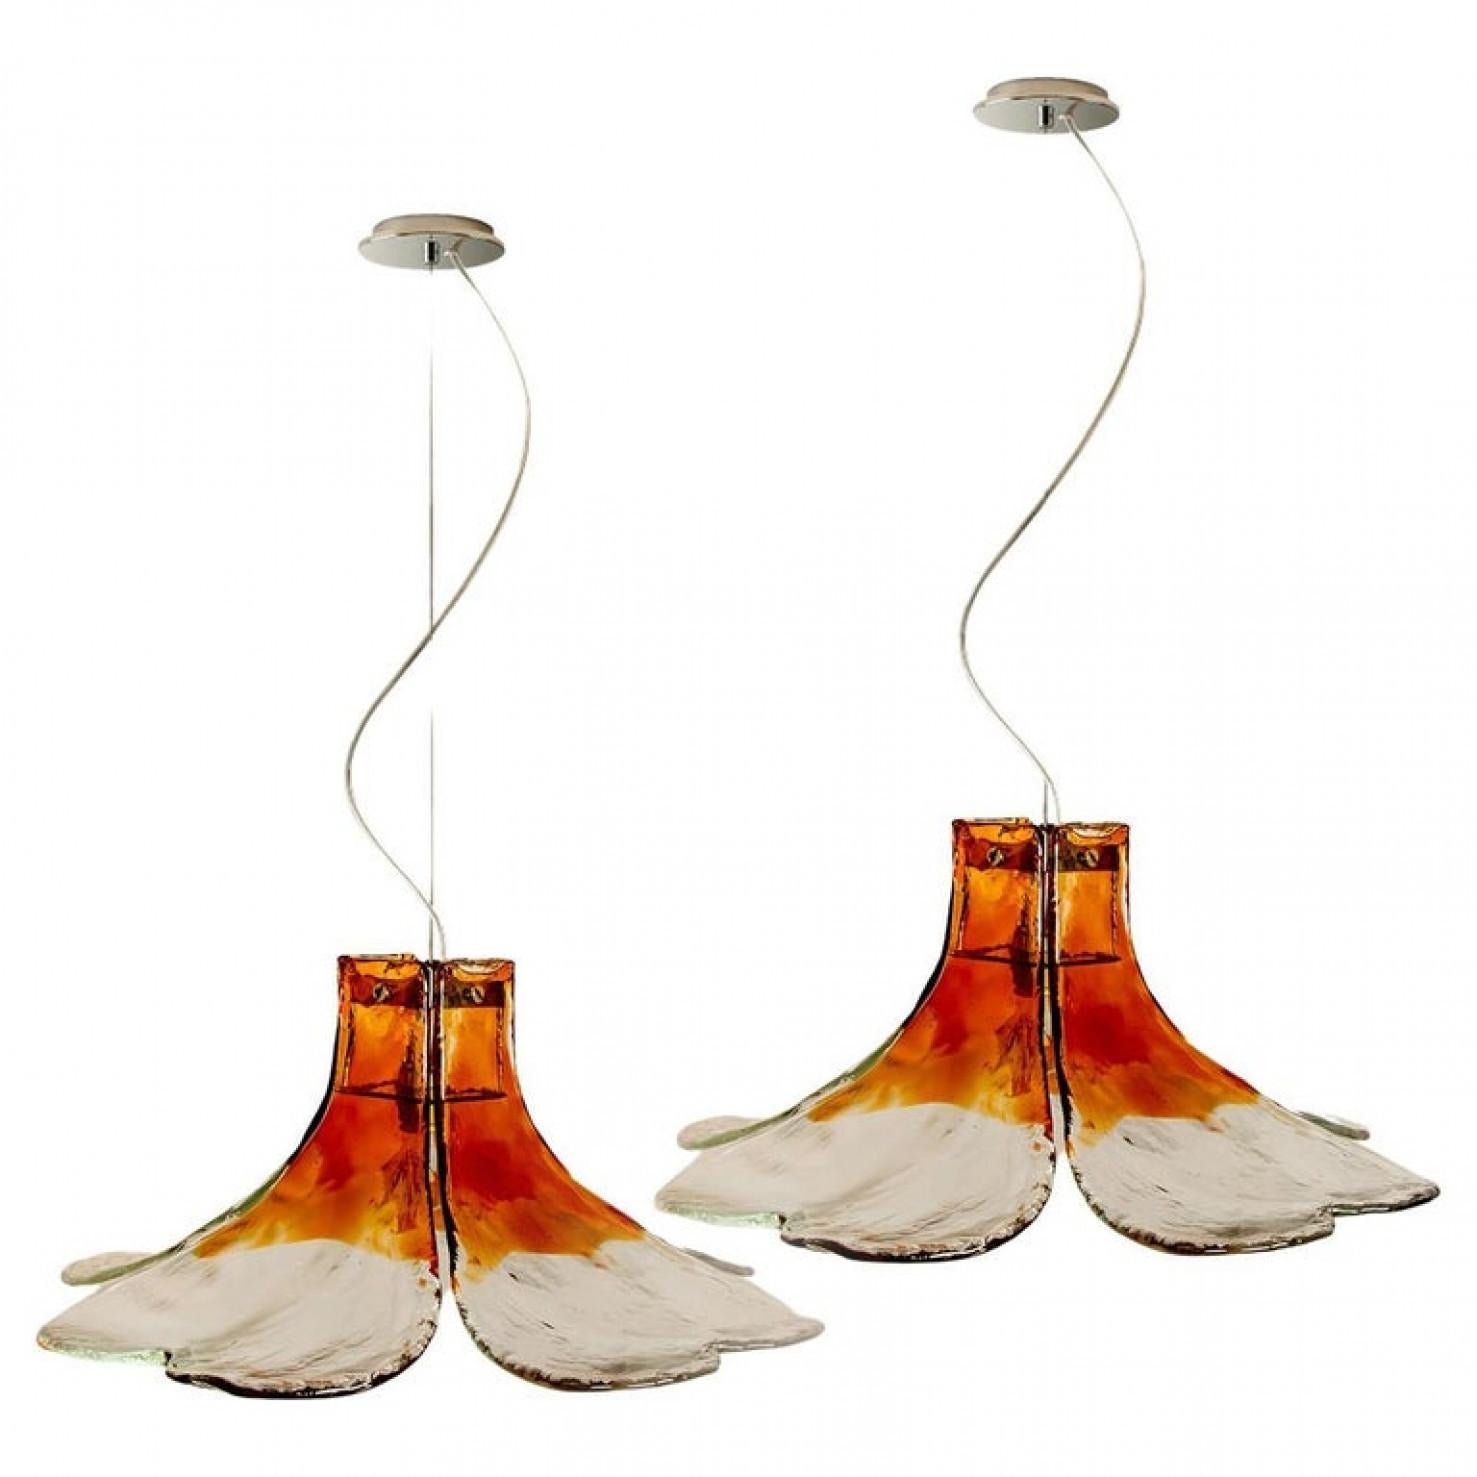 1 of the 2 pendant lamps model LS185 by Carlo Nason for Mazzega.
Four crystal clear and orange colored leaves compose this beautiful piece made in thick handmade Murano glass.

Measures: H 13 